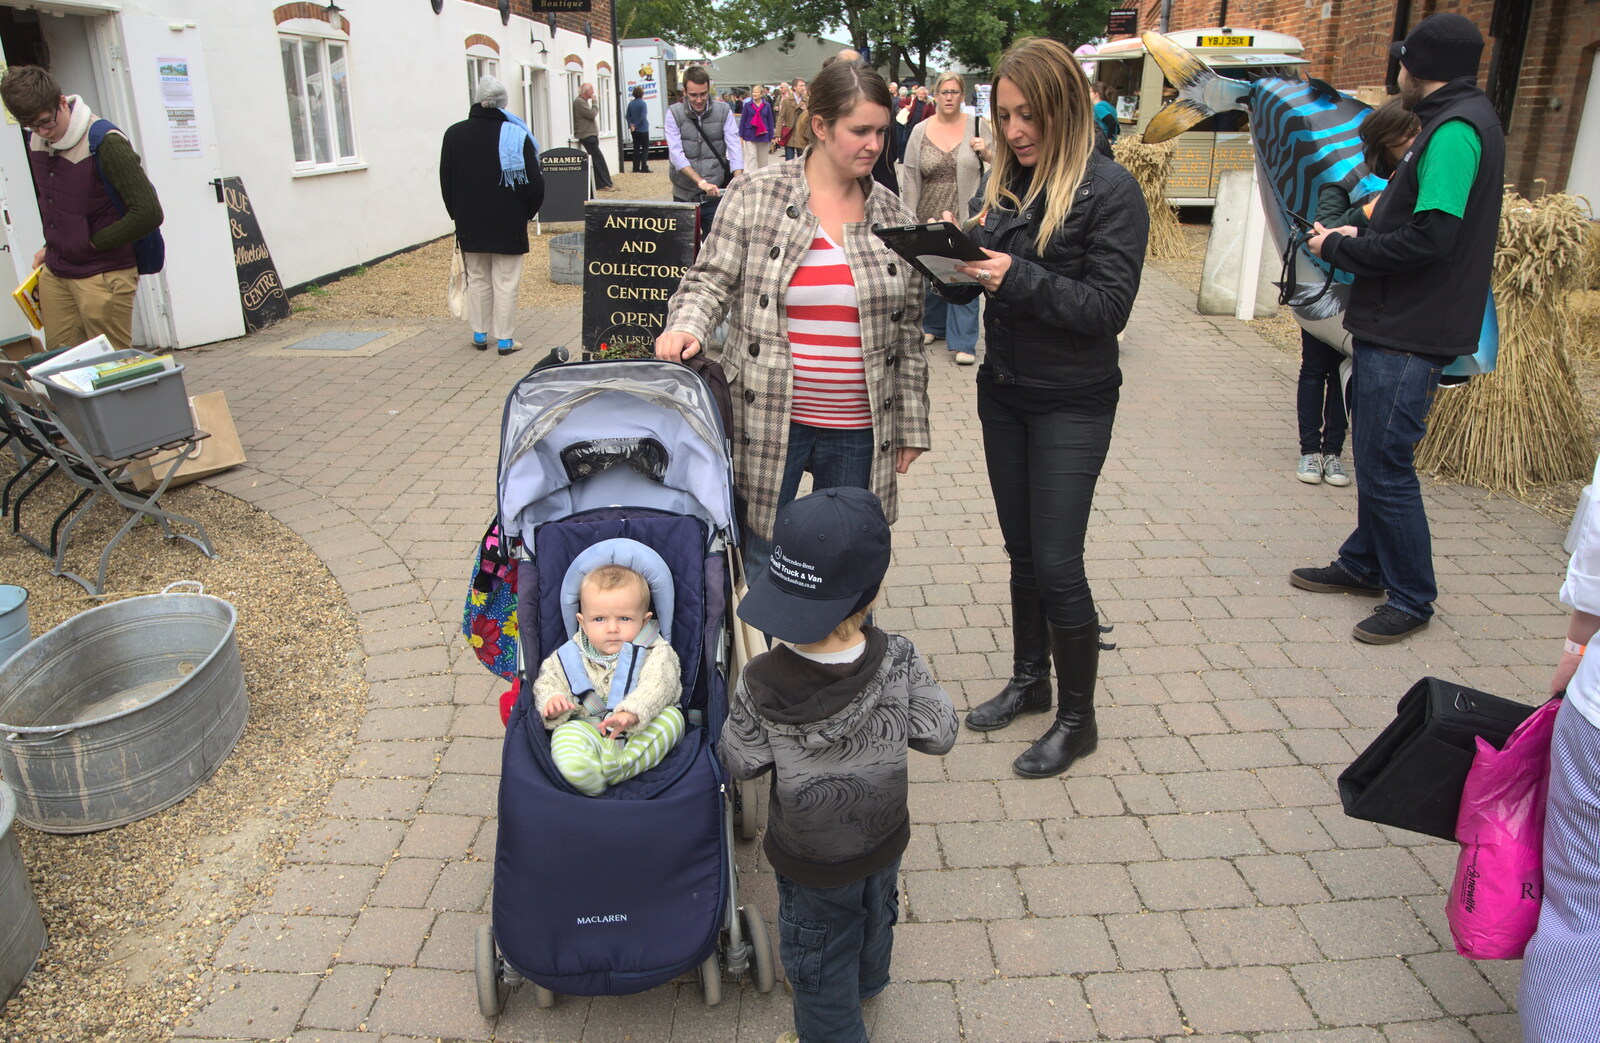 Isobel does a quick survey from The Aldeburgh Food Festival, Aldeburgh, Suffolk - 30th September 2012